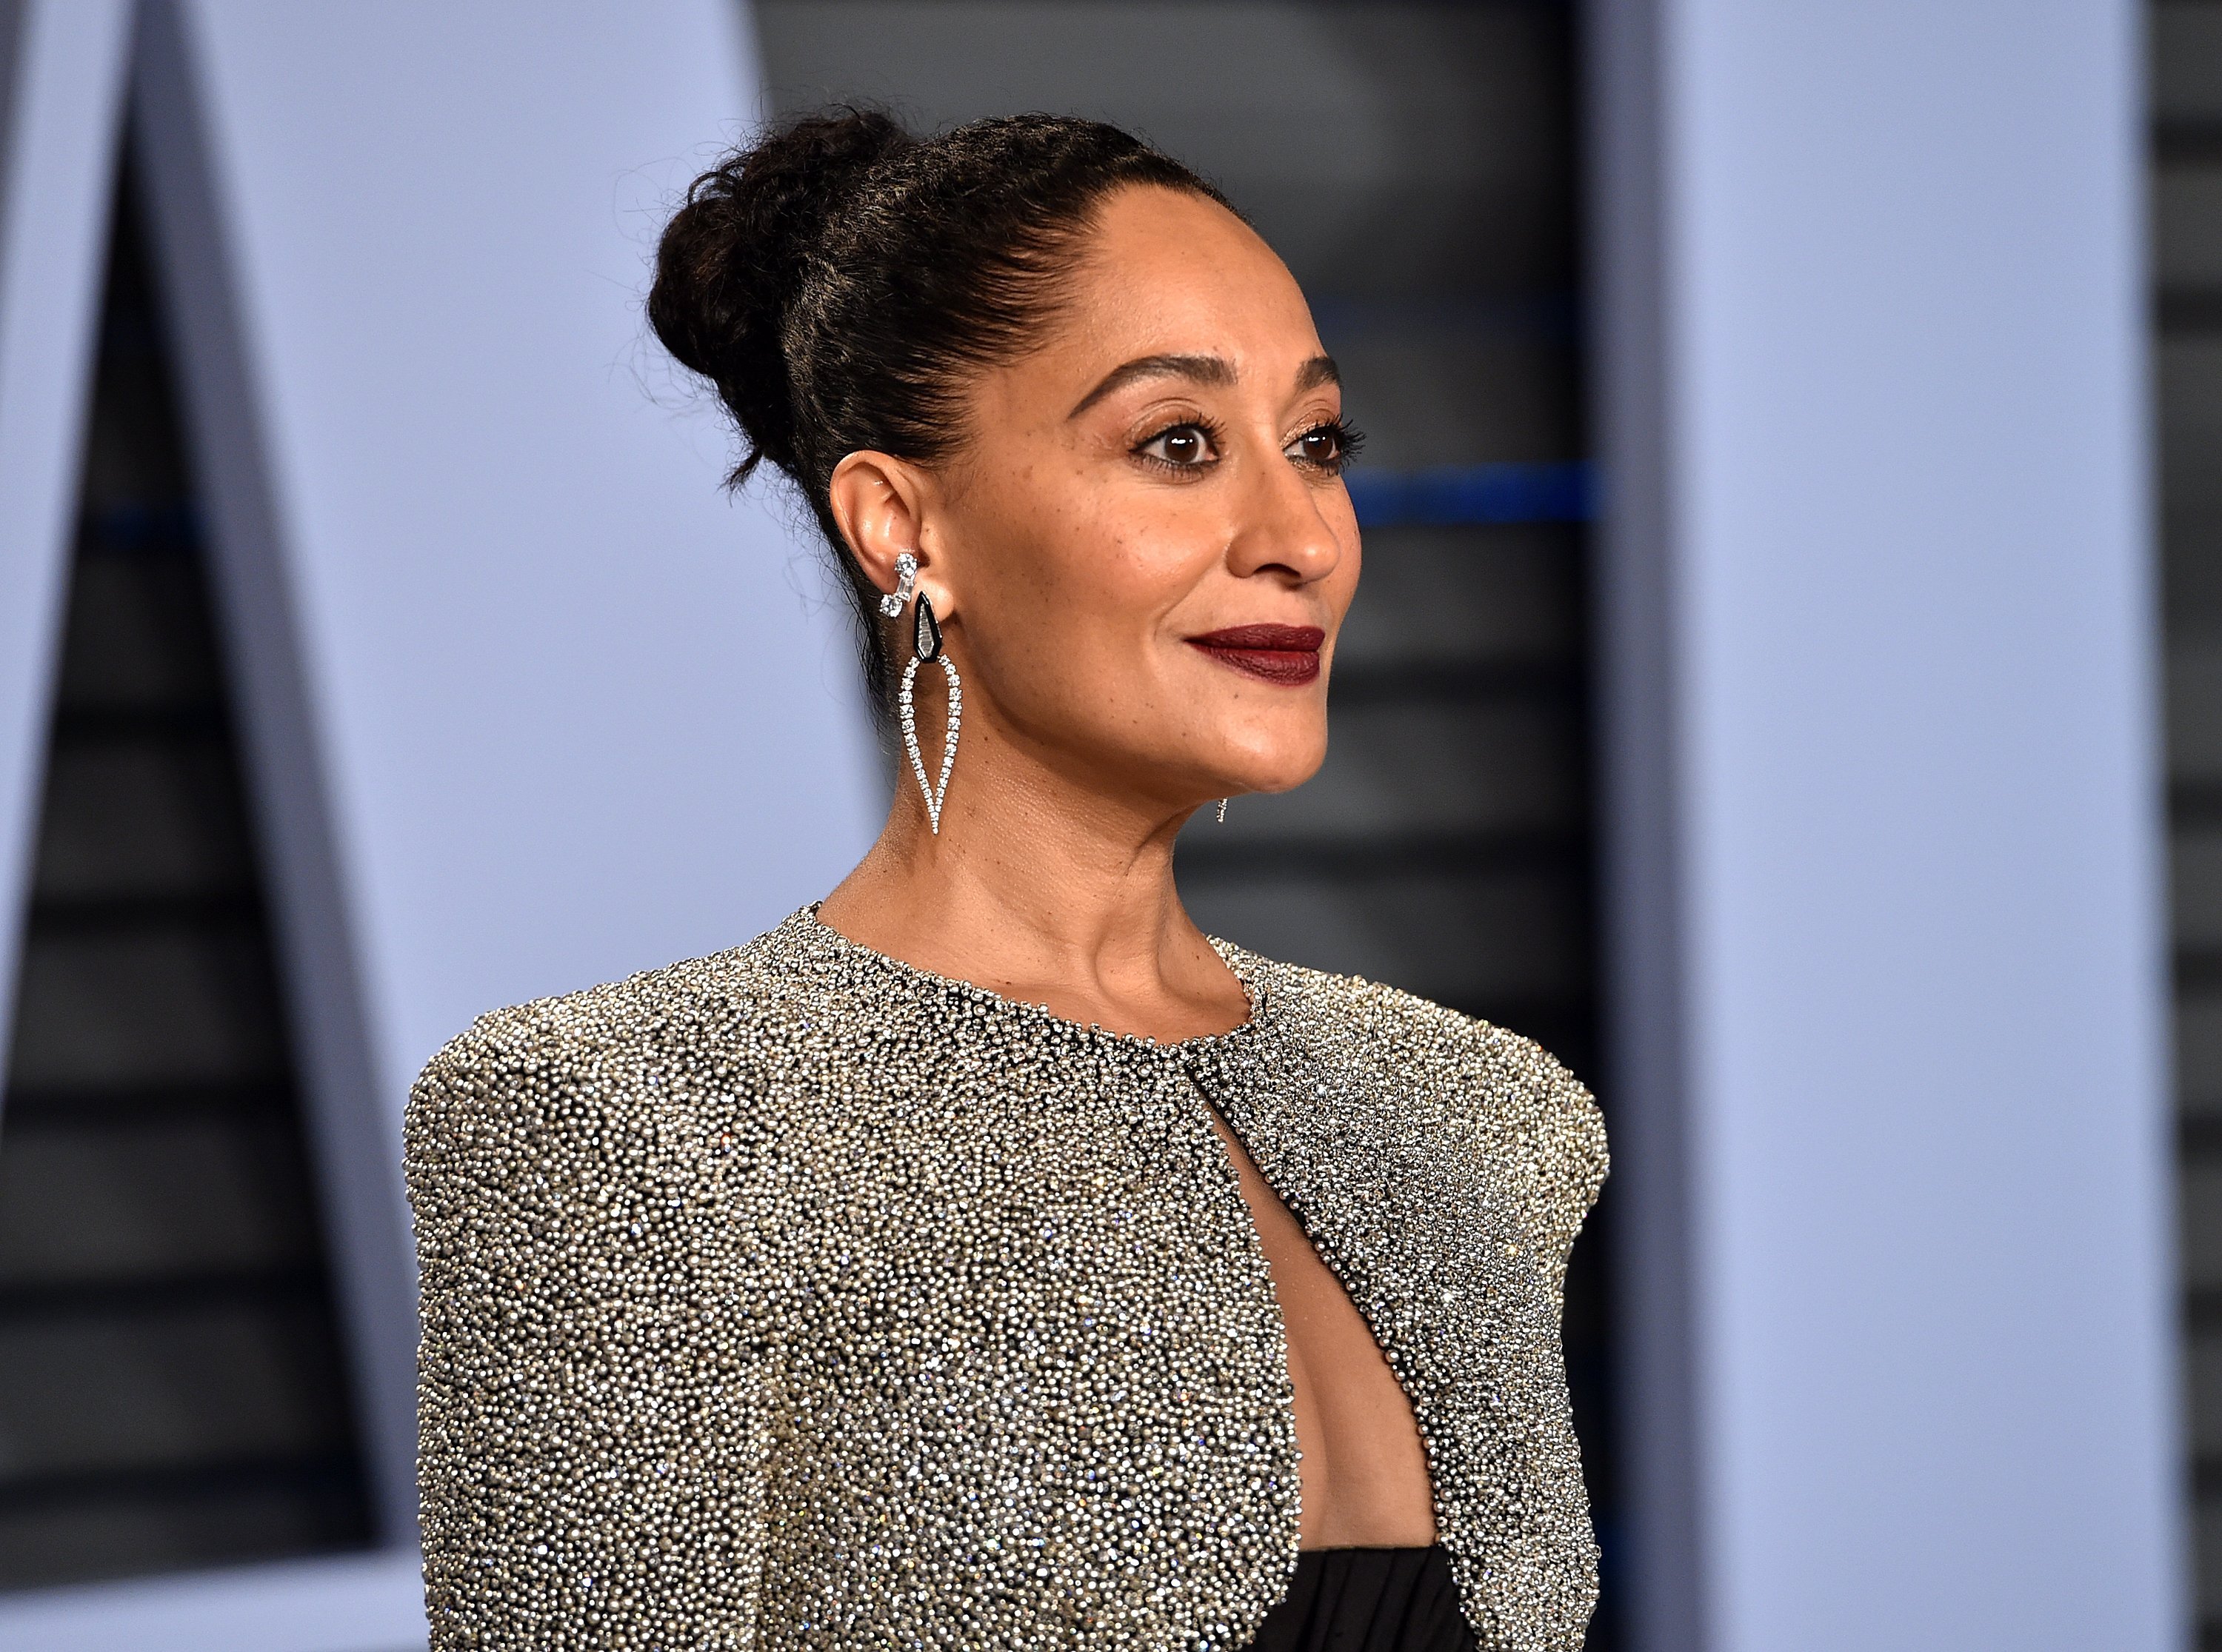 Tracee Ellis Ross attending the 2018 Vanity Fair Oscars Party. | Photo: Getty Images